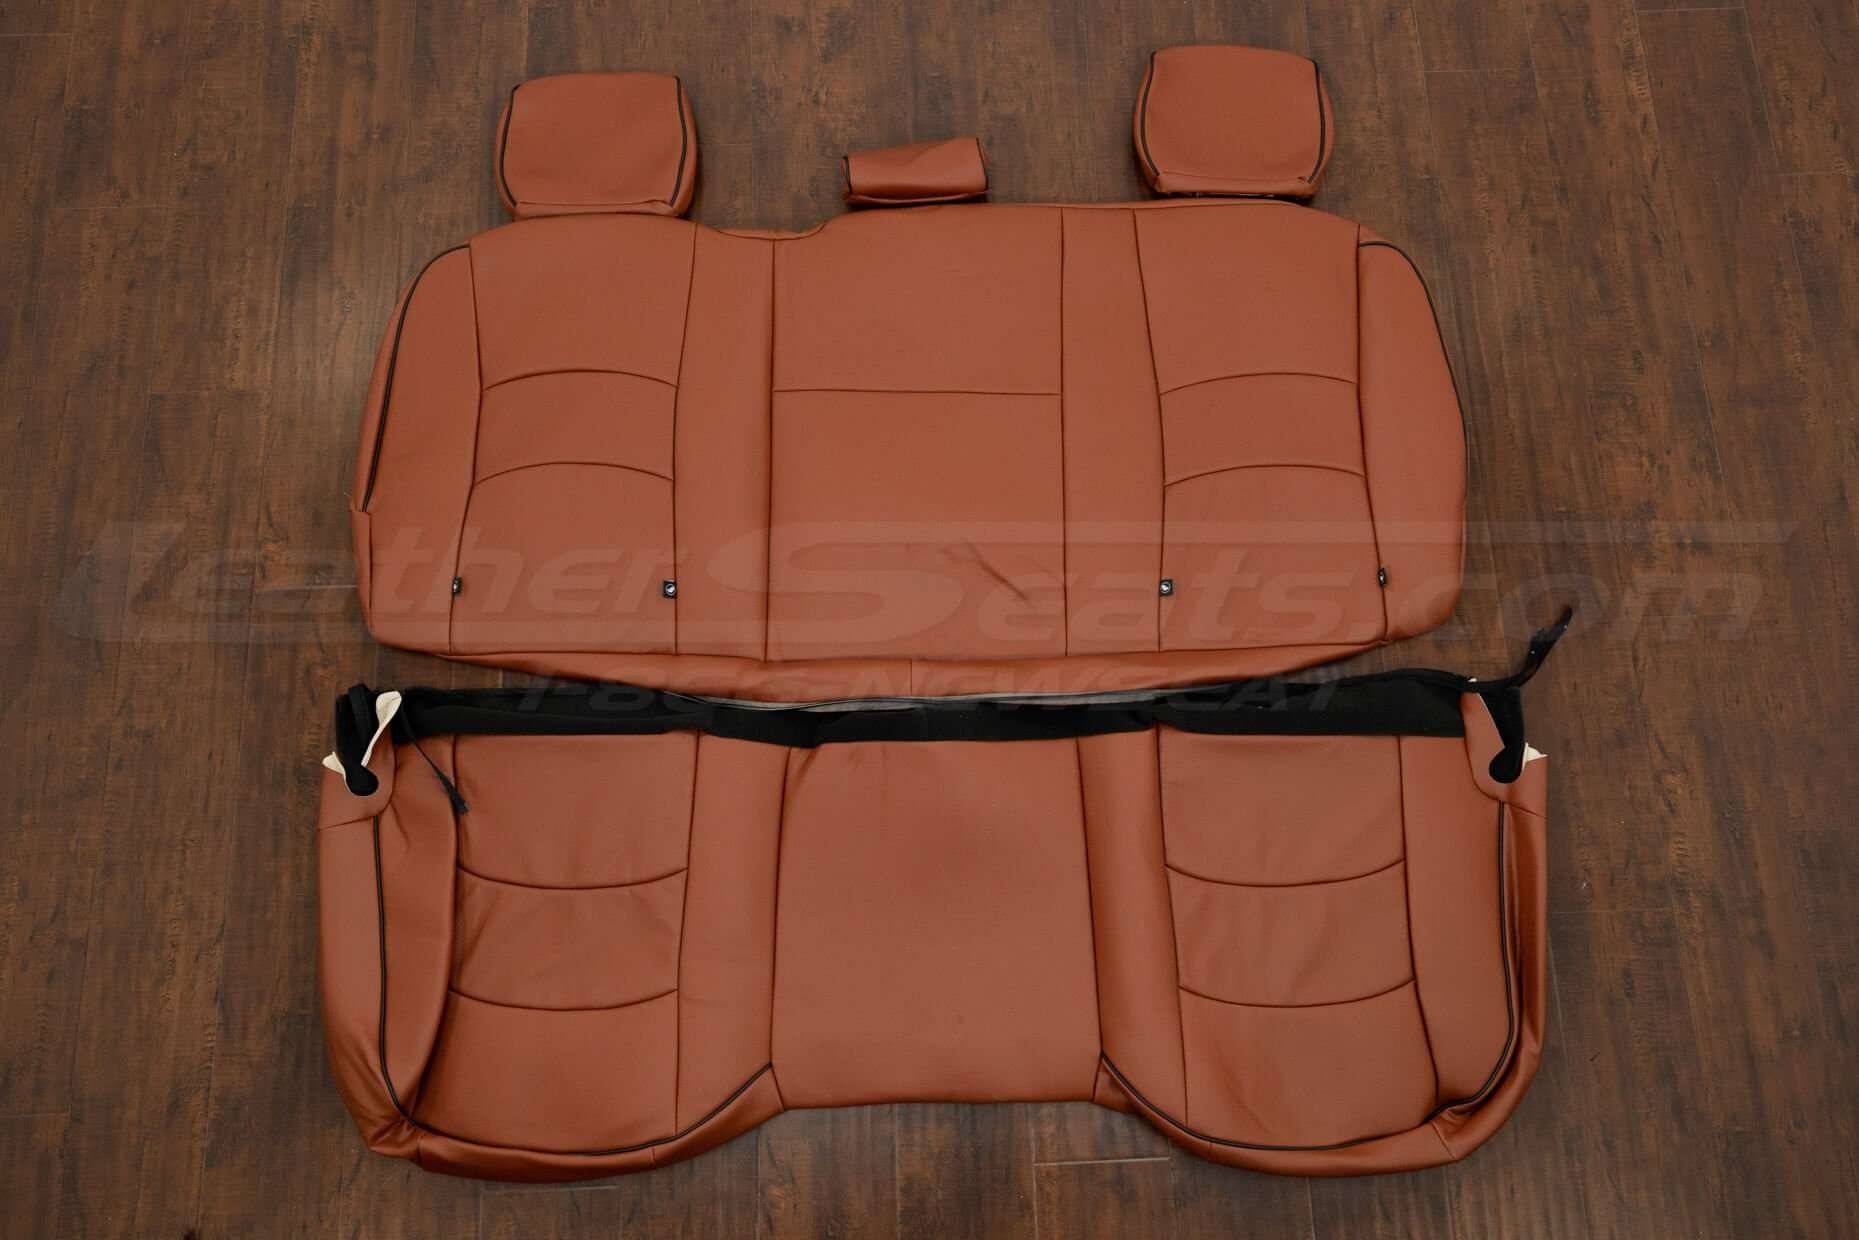 Mitt Brown rear seat upholstery for Dodge Ram Crew Cab